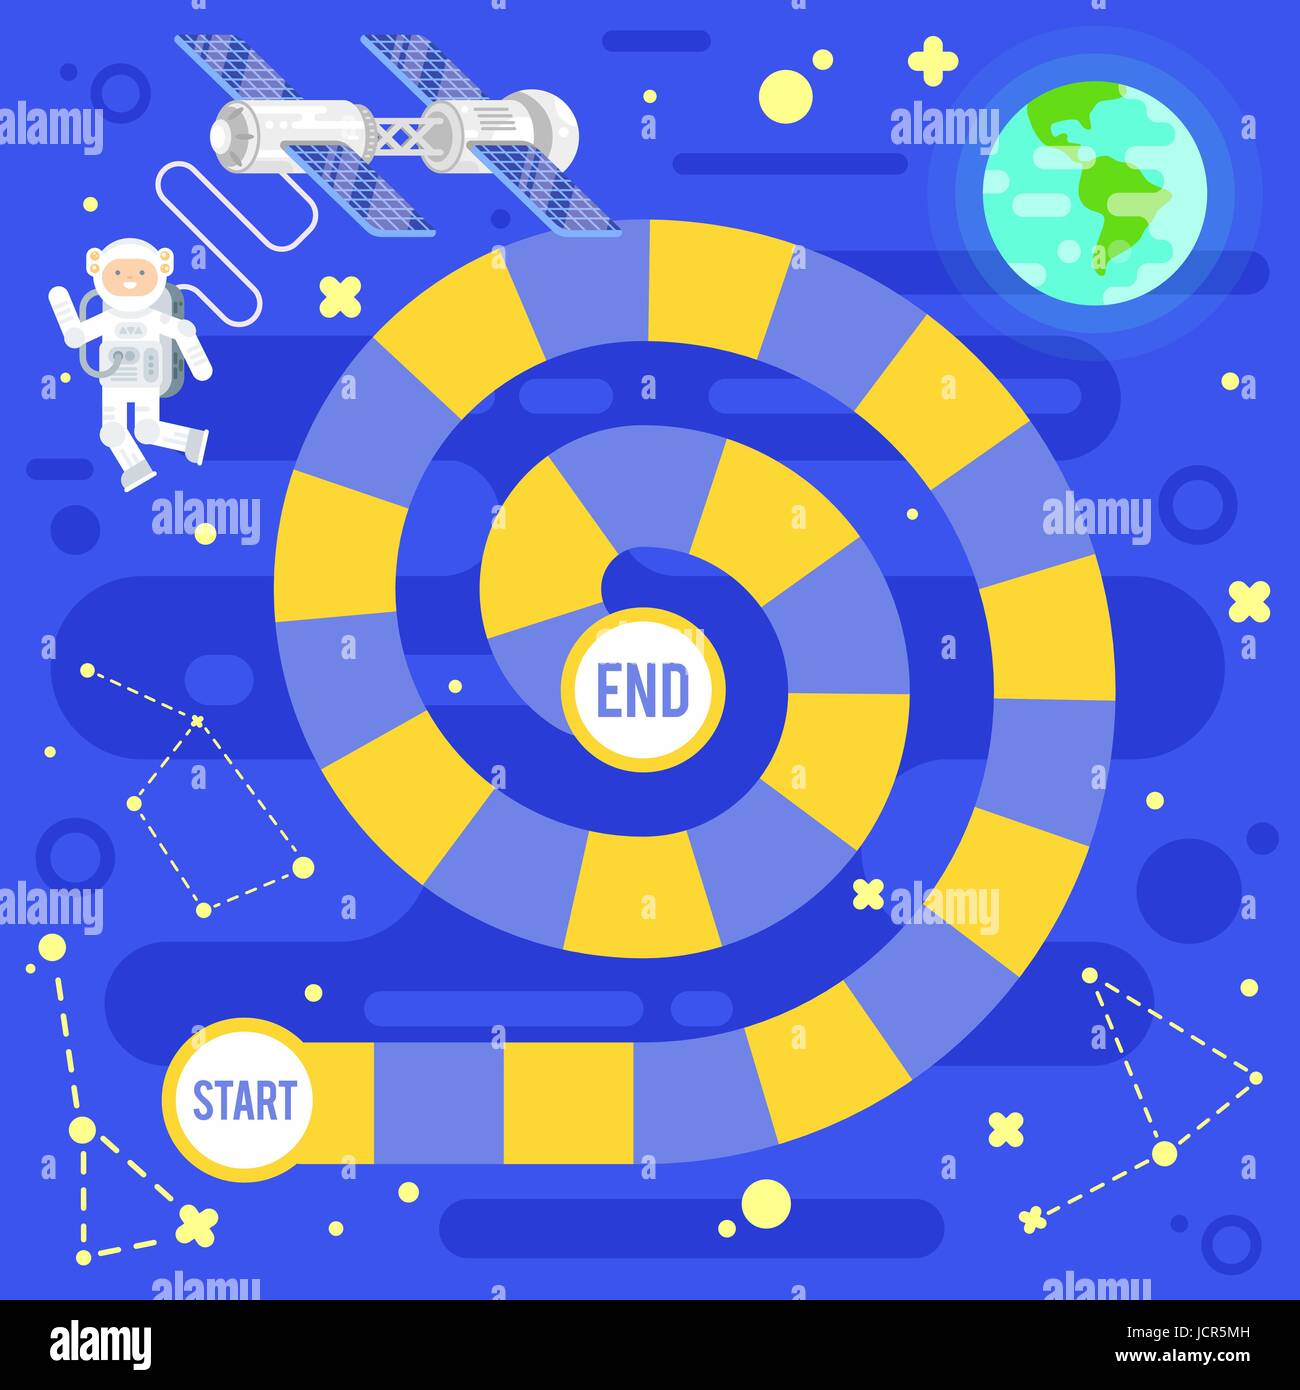 Vector flat style illustration of kids science and space board game. Template for print. Stock Vector